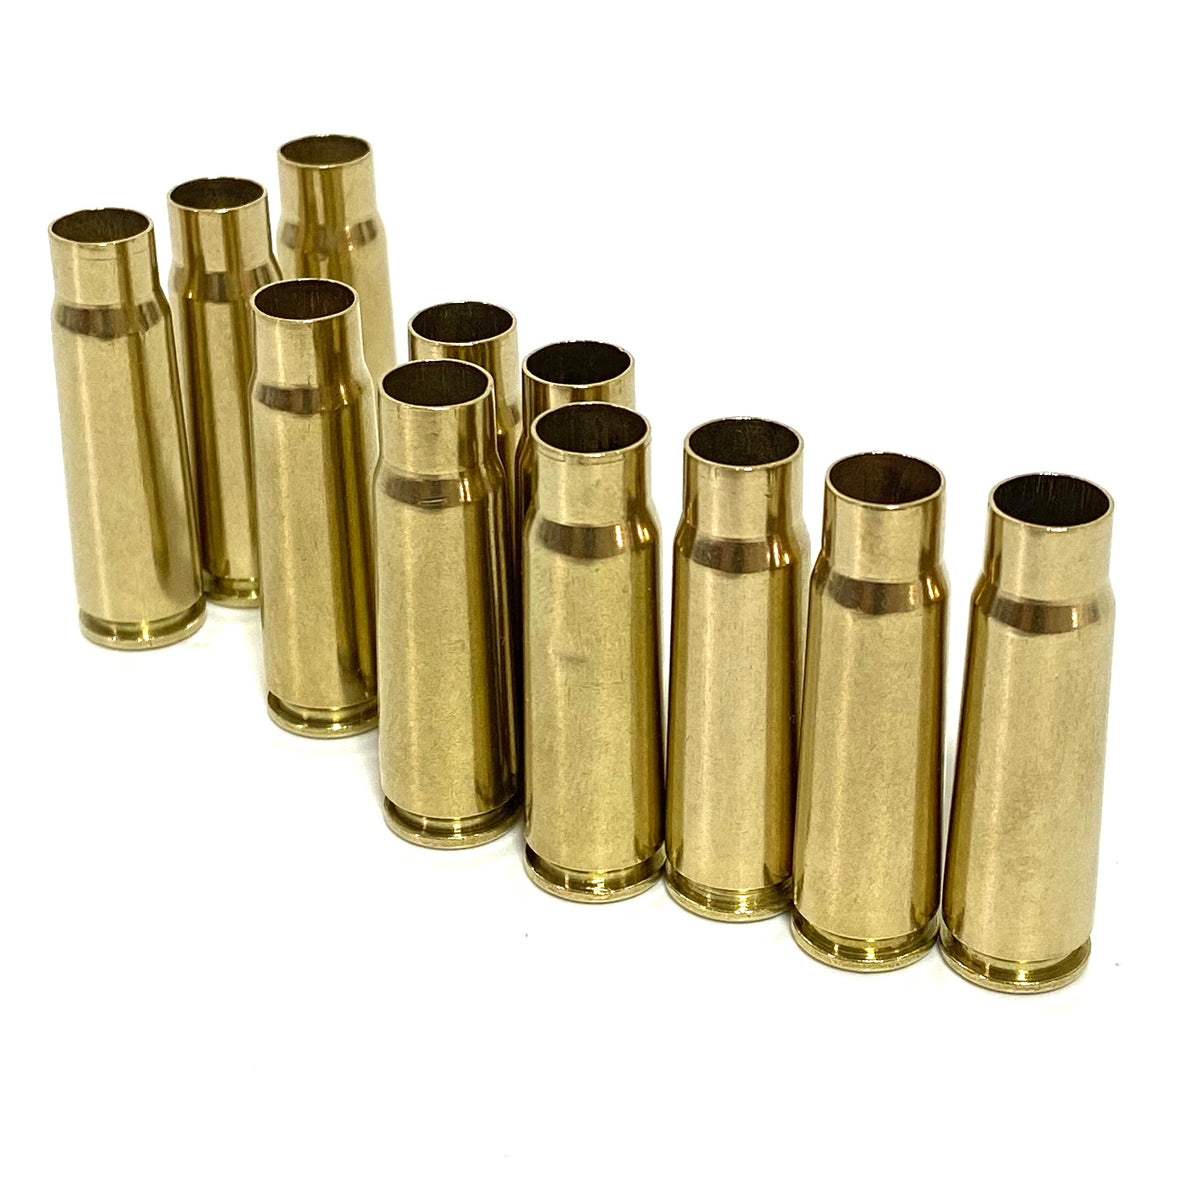 Replica AK-47 Bullets - Package of 6 - OD55 - Medieval Collectibles